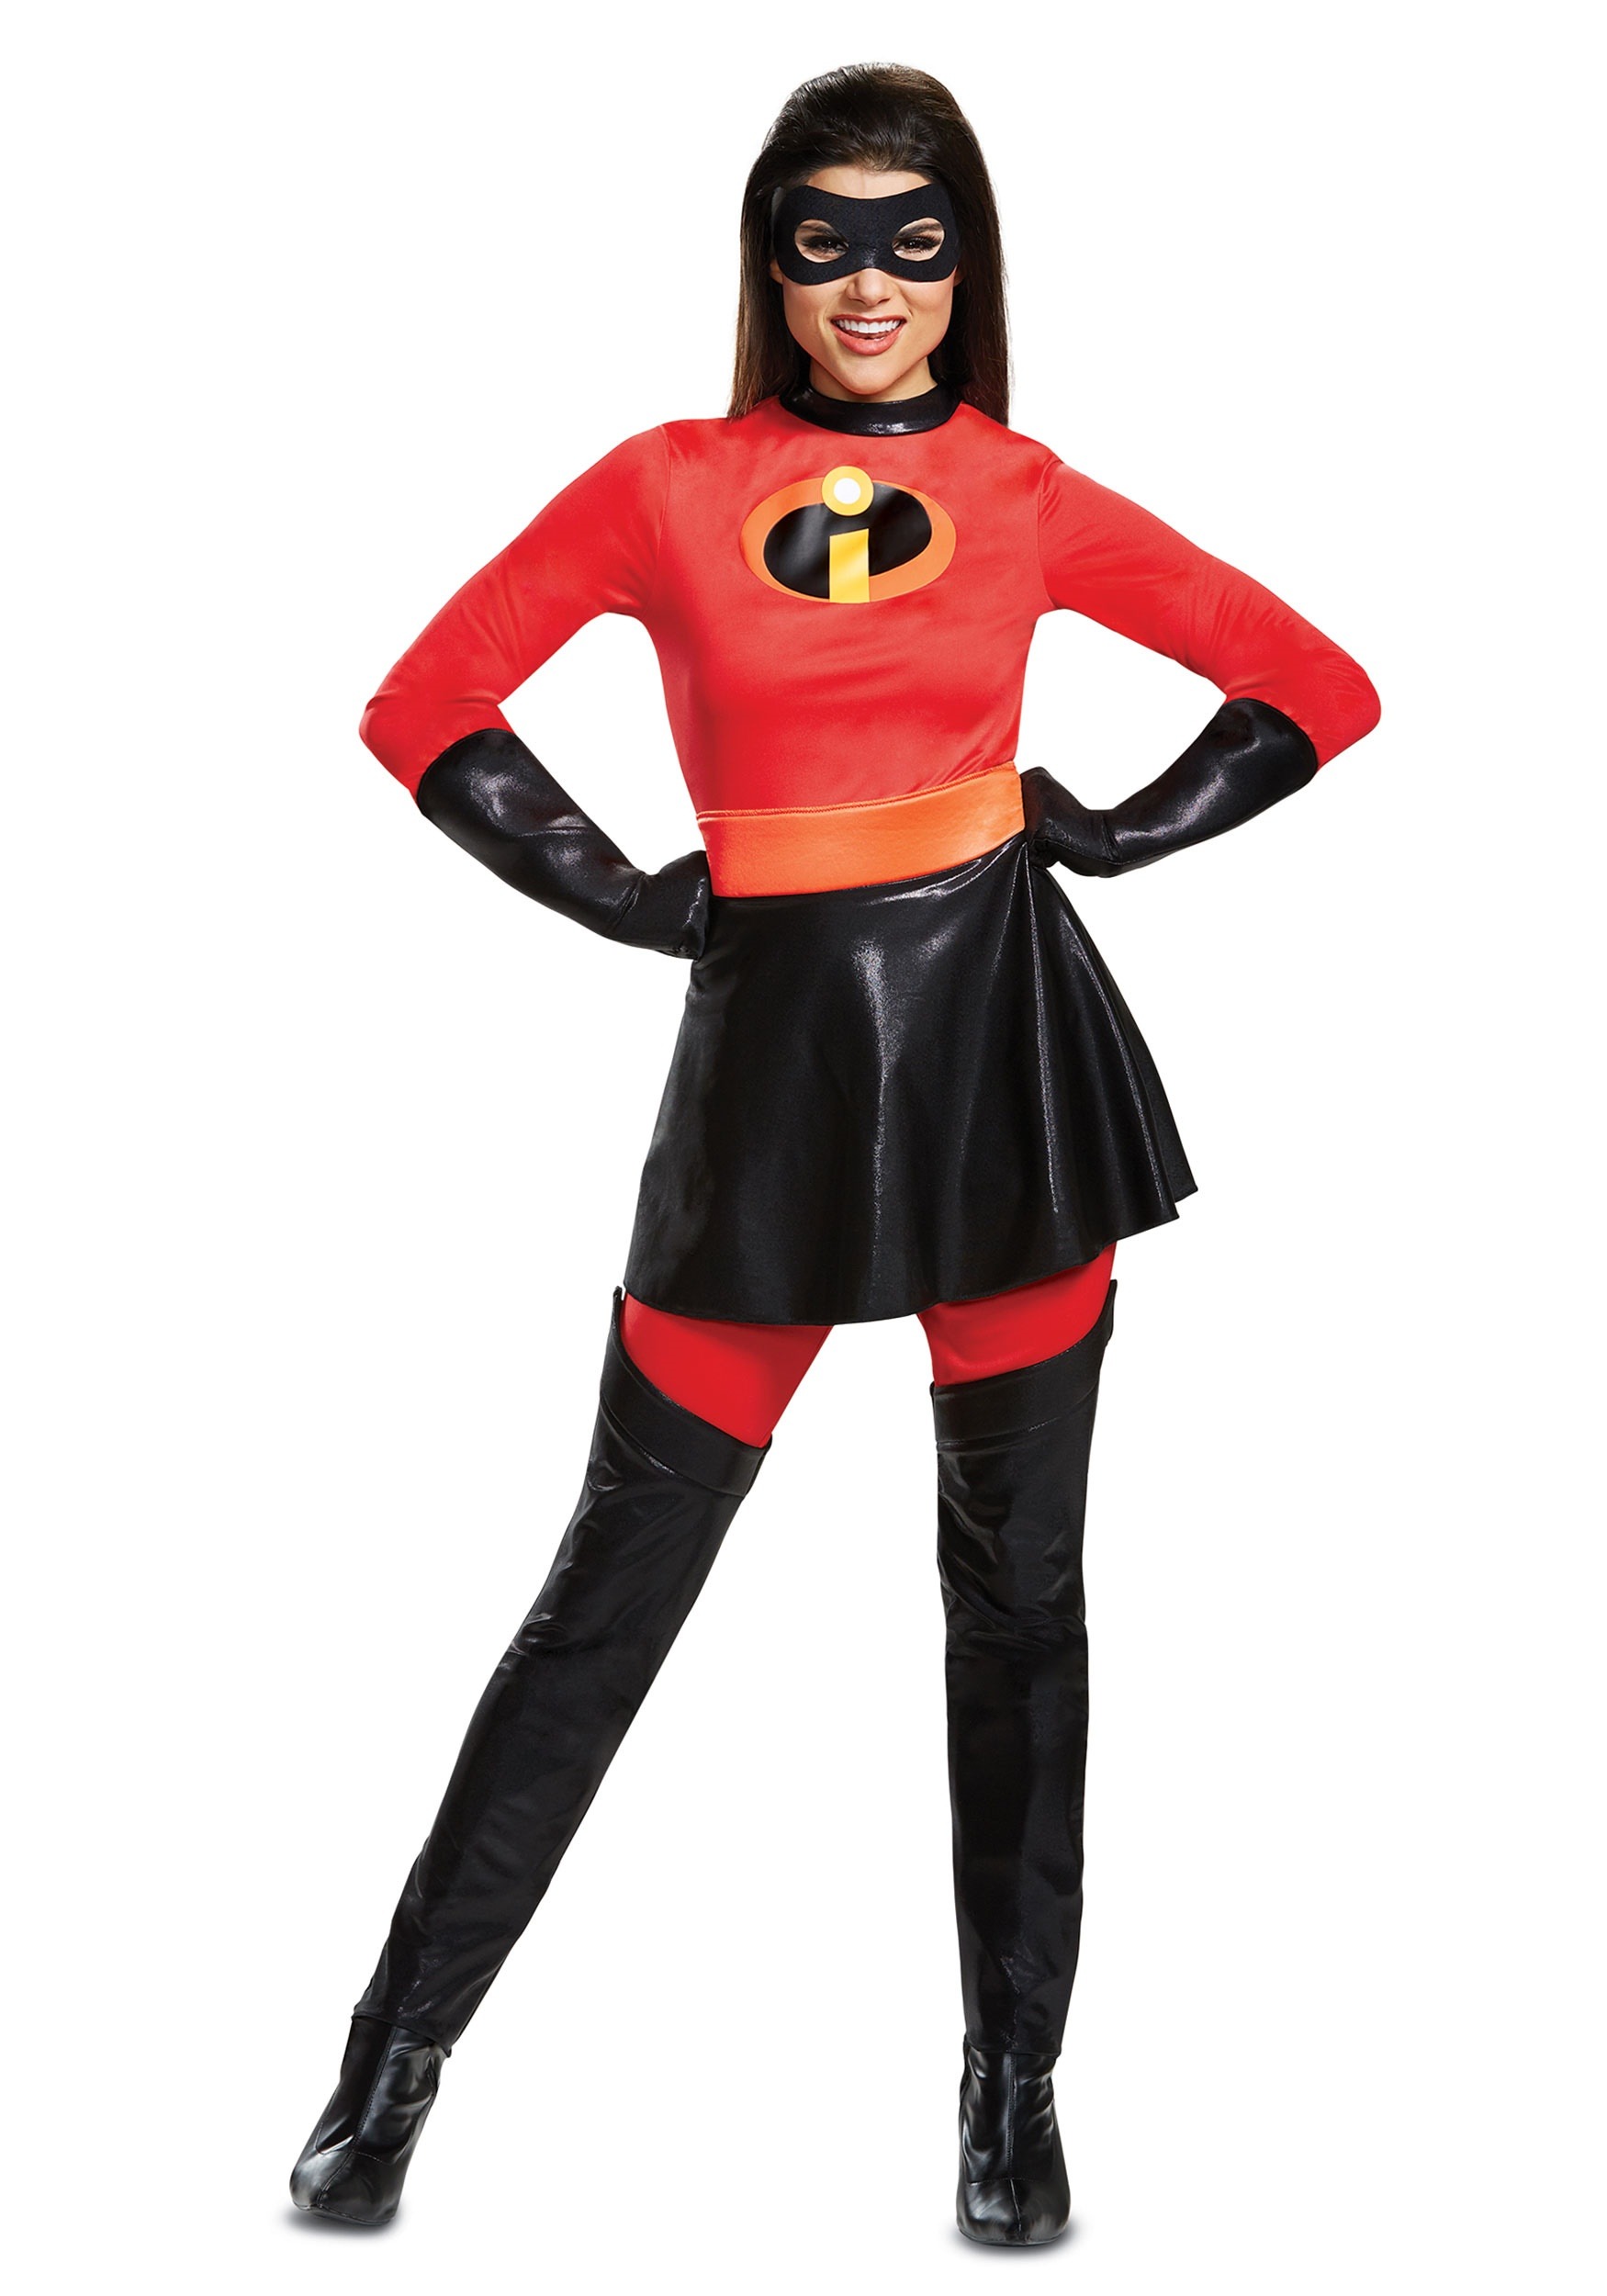 Must Have Disney Incredibles 2 Deluxe Mrs Incredible Costume For Women From Disguise Fandom Shop - roblox costume maker in the incredibles